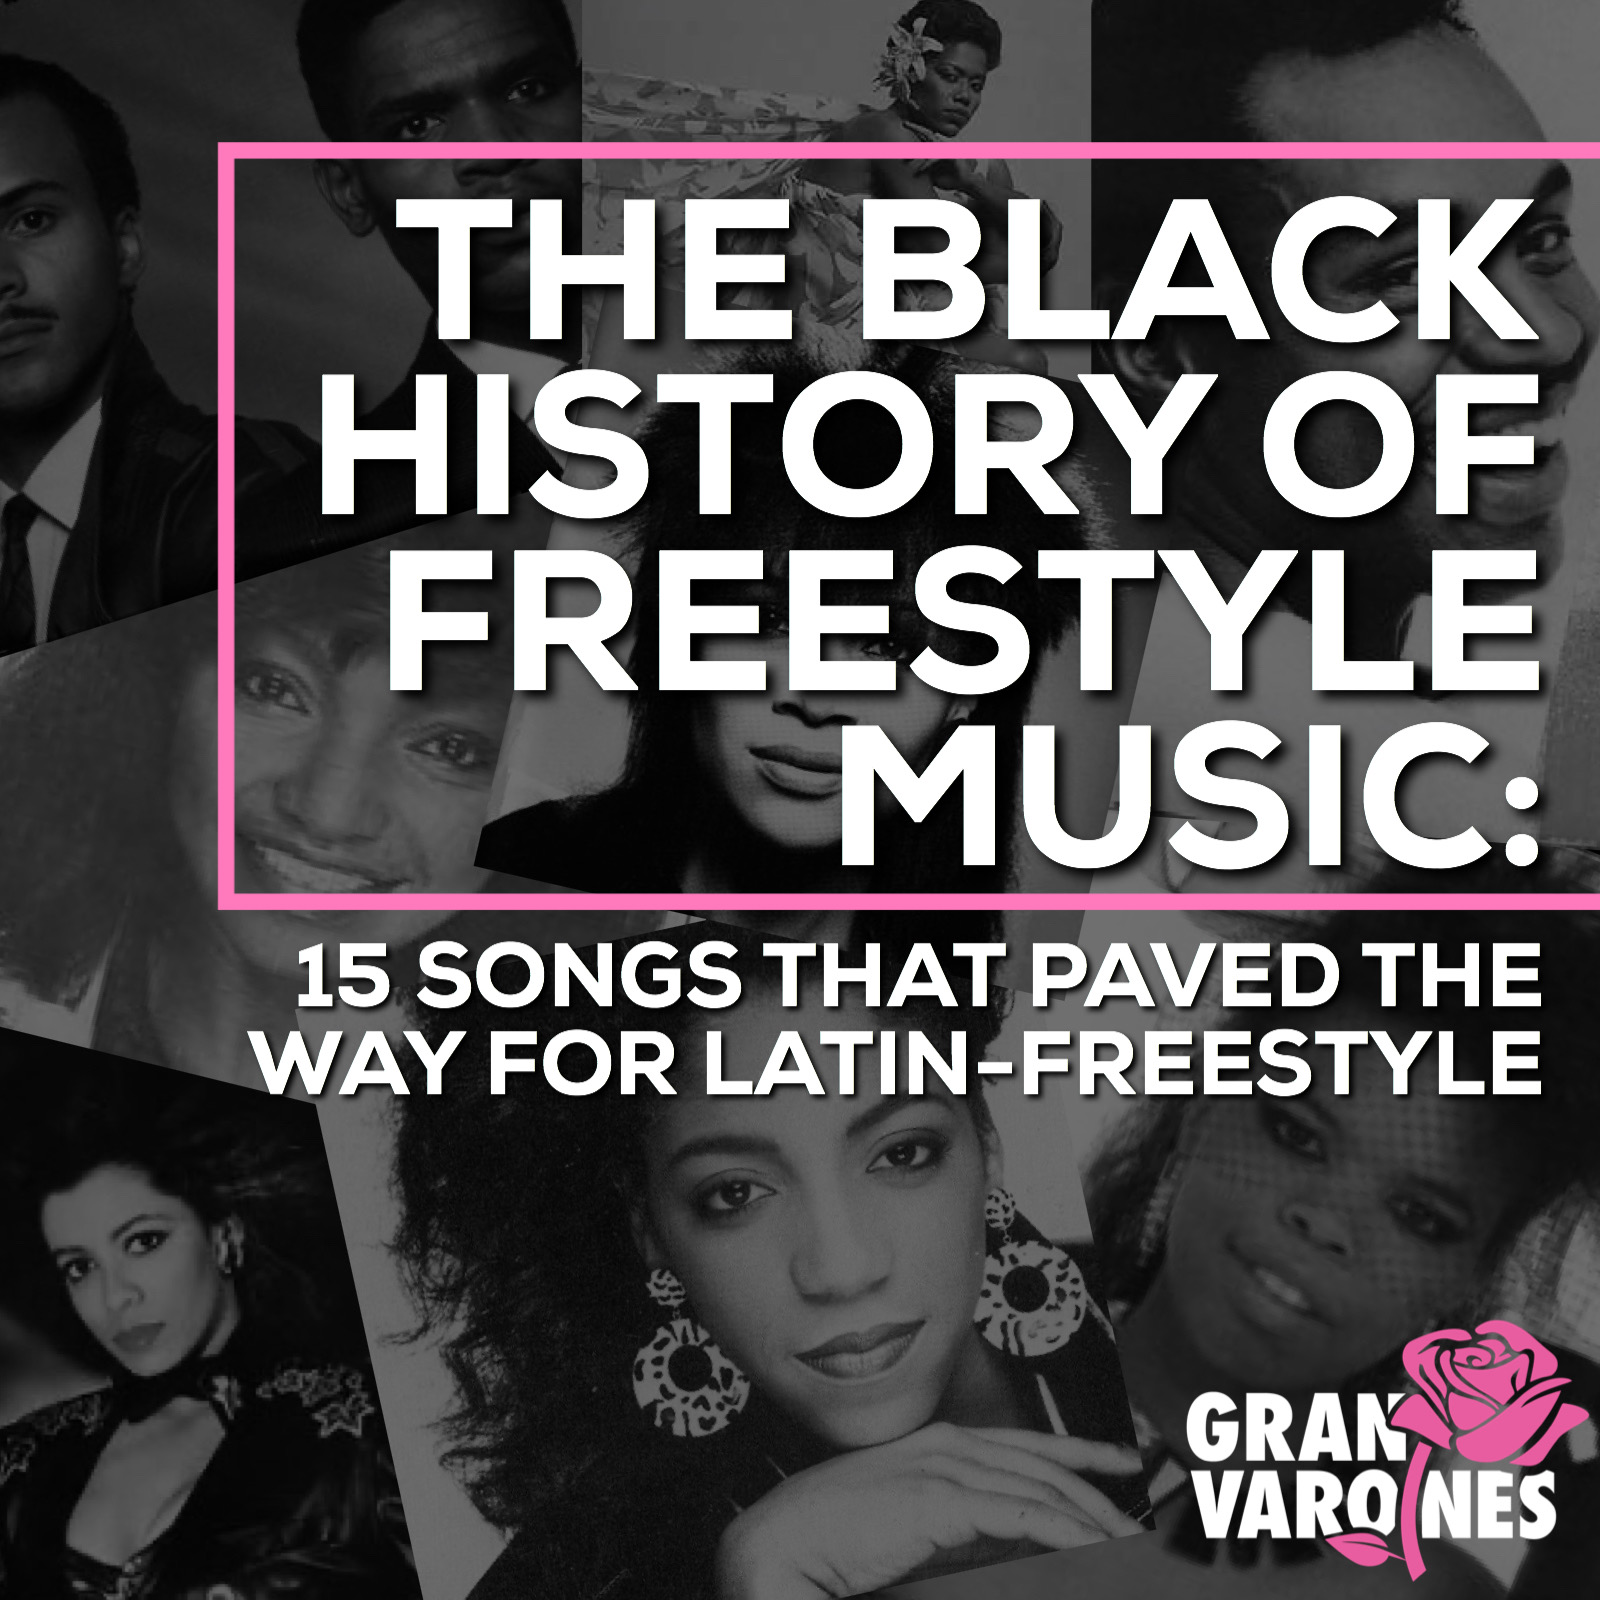 The Black History of Freestyle Music